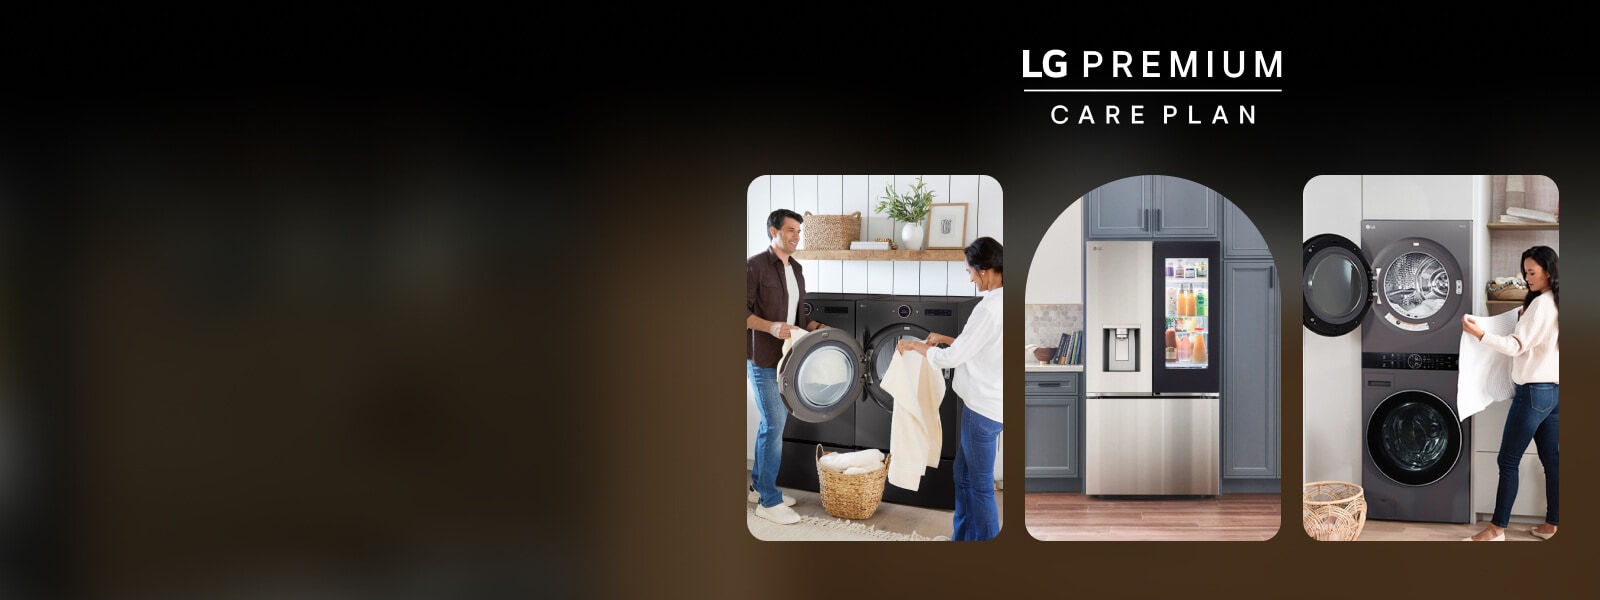 Get extended coverage plus up to 30% off select appliances image for desktop